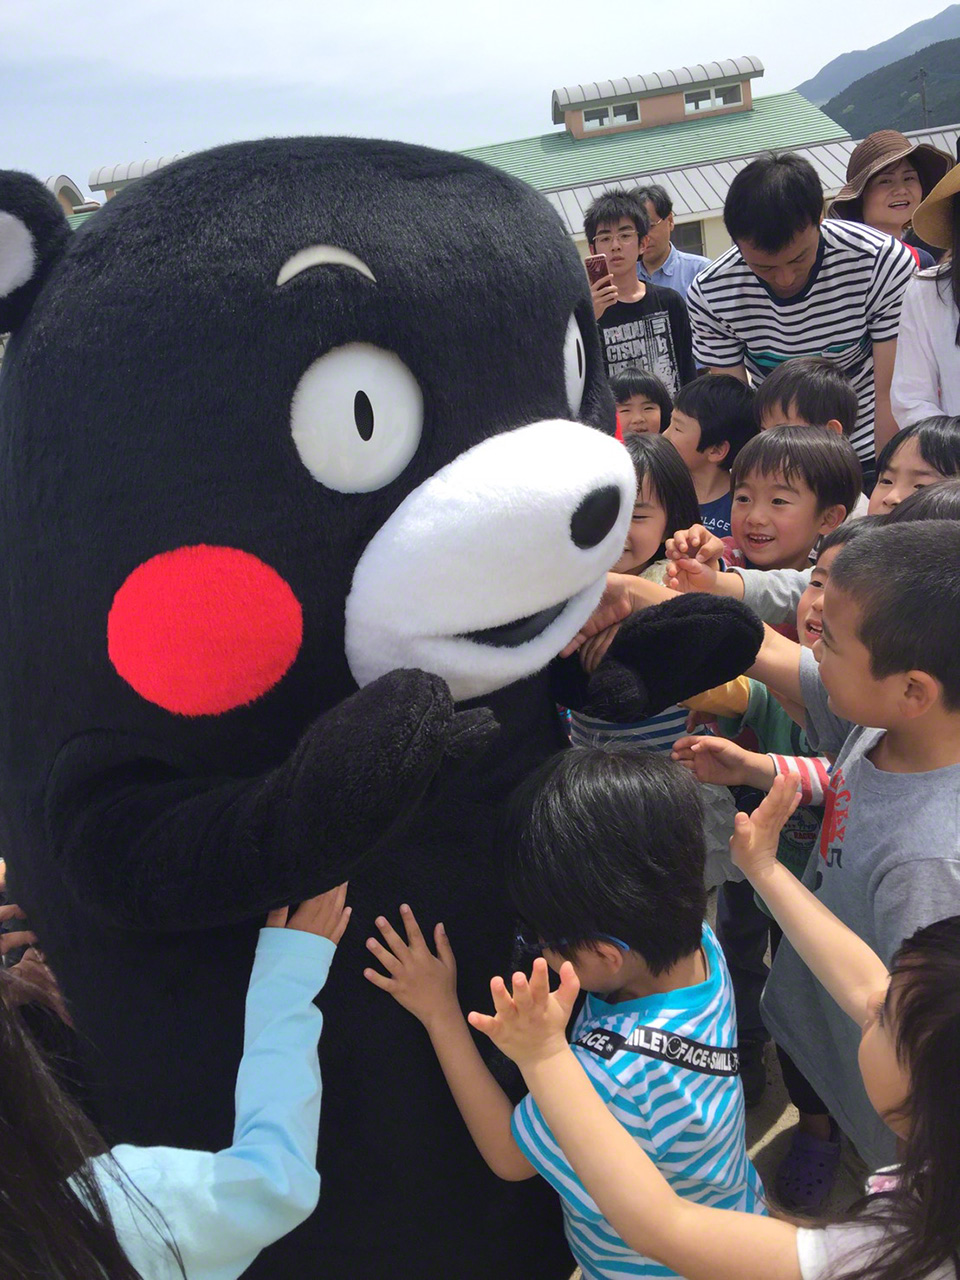 Kumamon visits children at a nursery school in Nishihara in May 2016 following a series of earthquakes in Kumamoto that heavily affected the area. (Courtesy Kumamoto Prefecture)